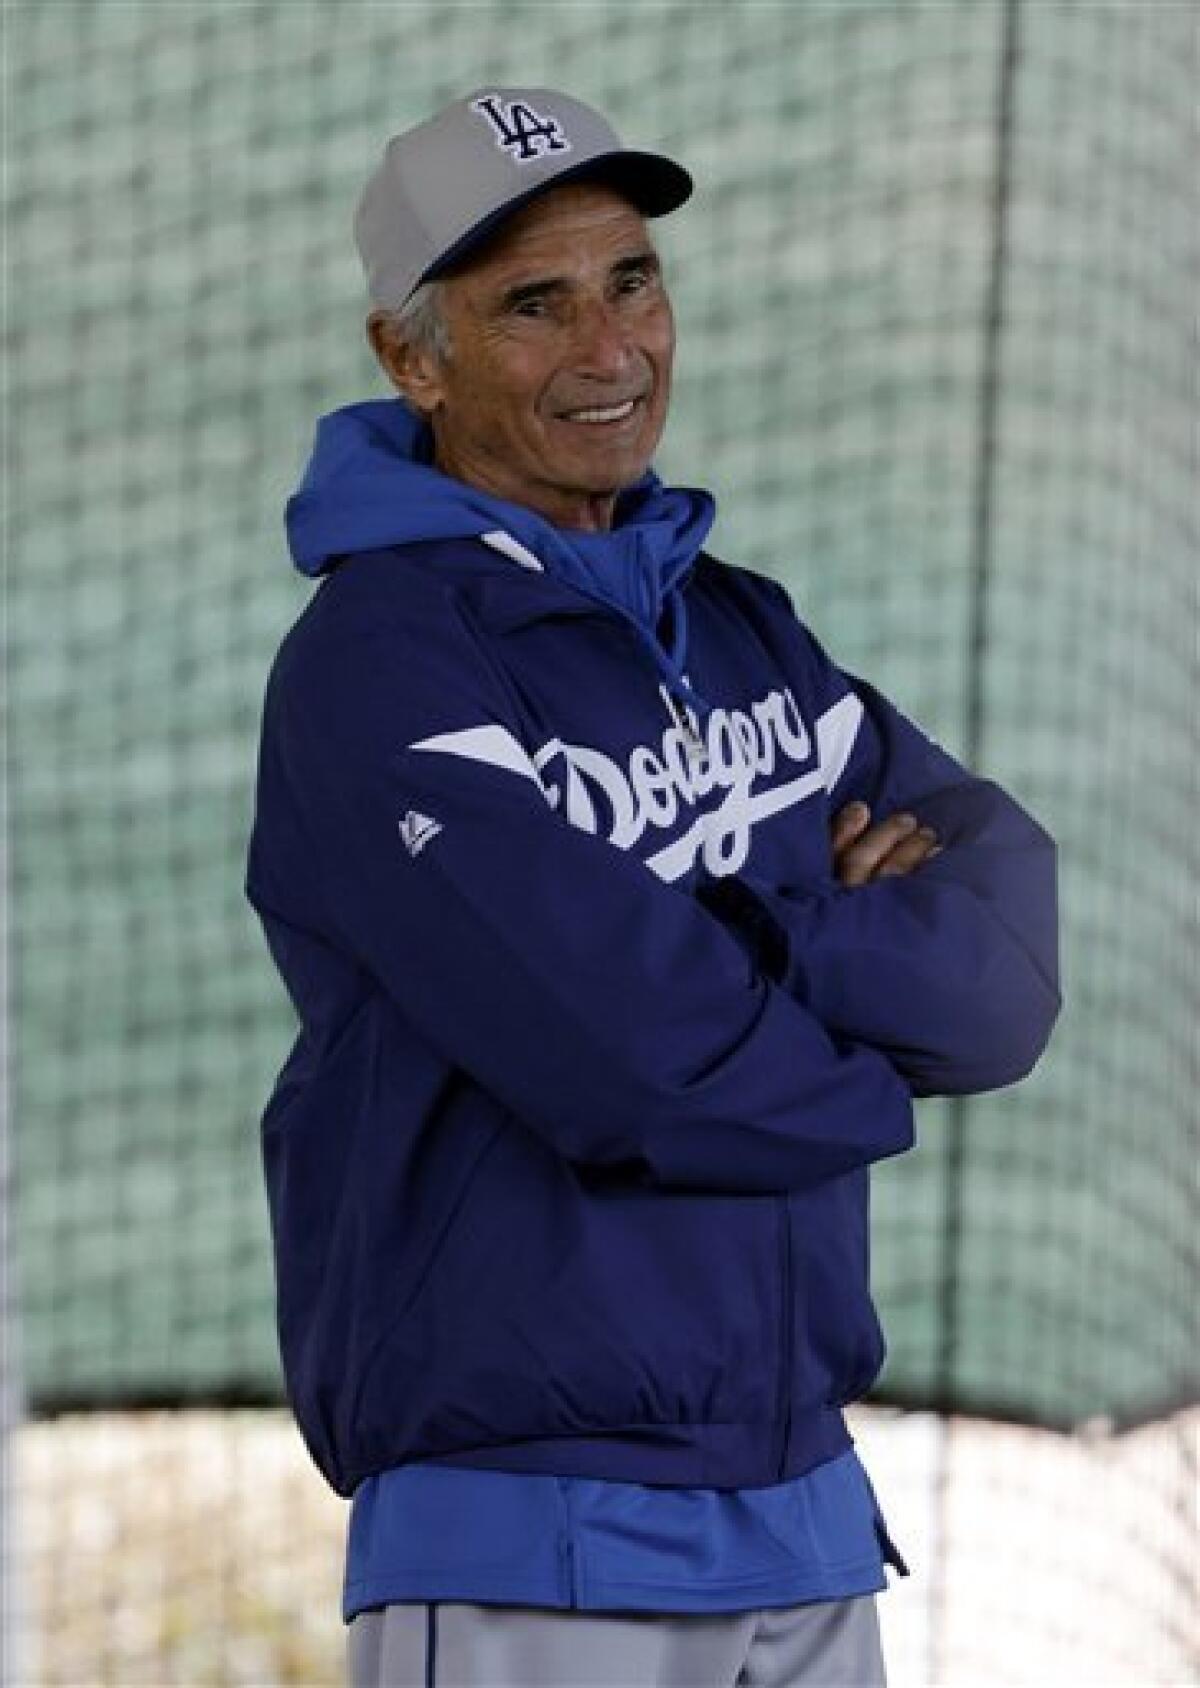 Sandy Koufax welcomed back to spring training - The San Diego Union-Tribune